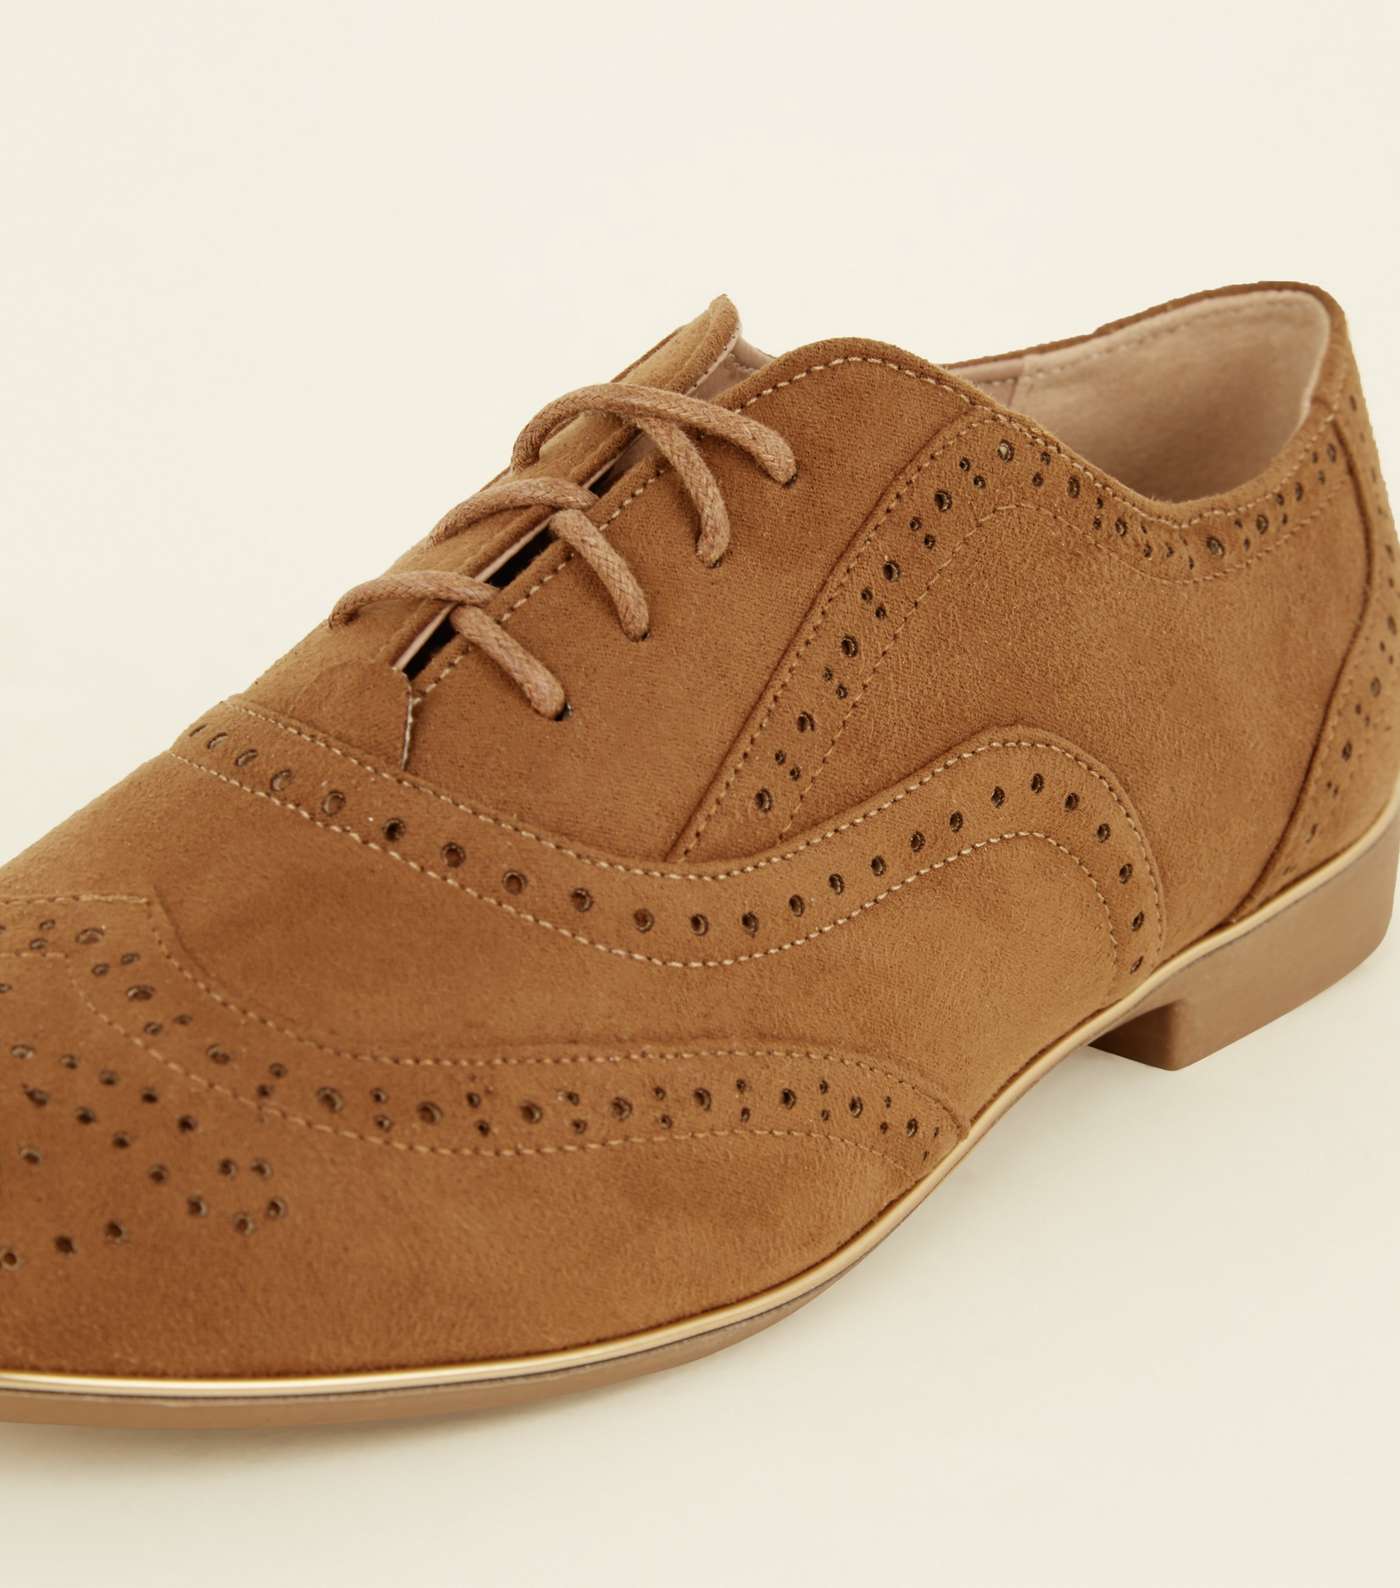 Wide Fit Tan Suedette Piped Edge Brogues Image 3